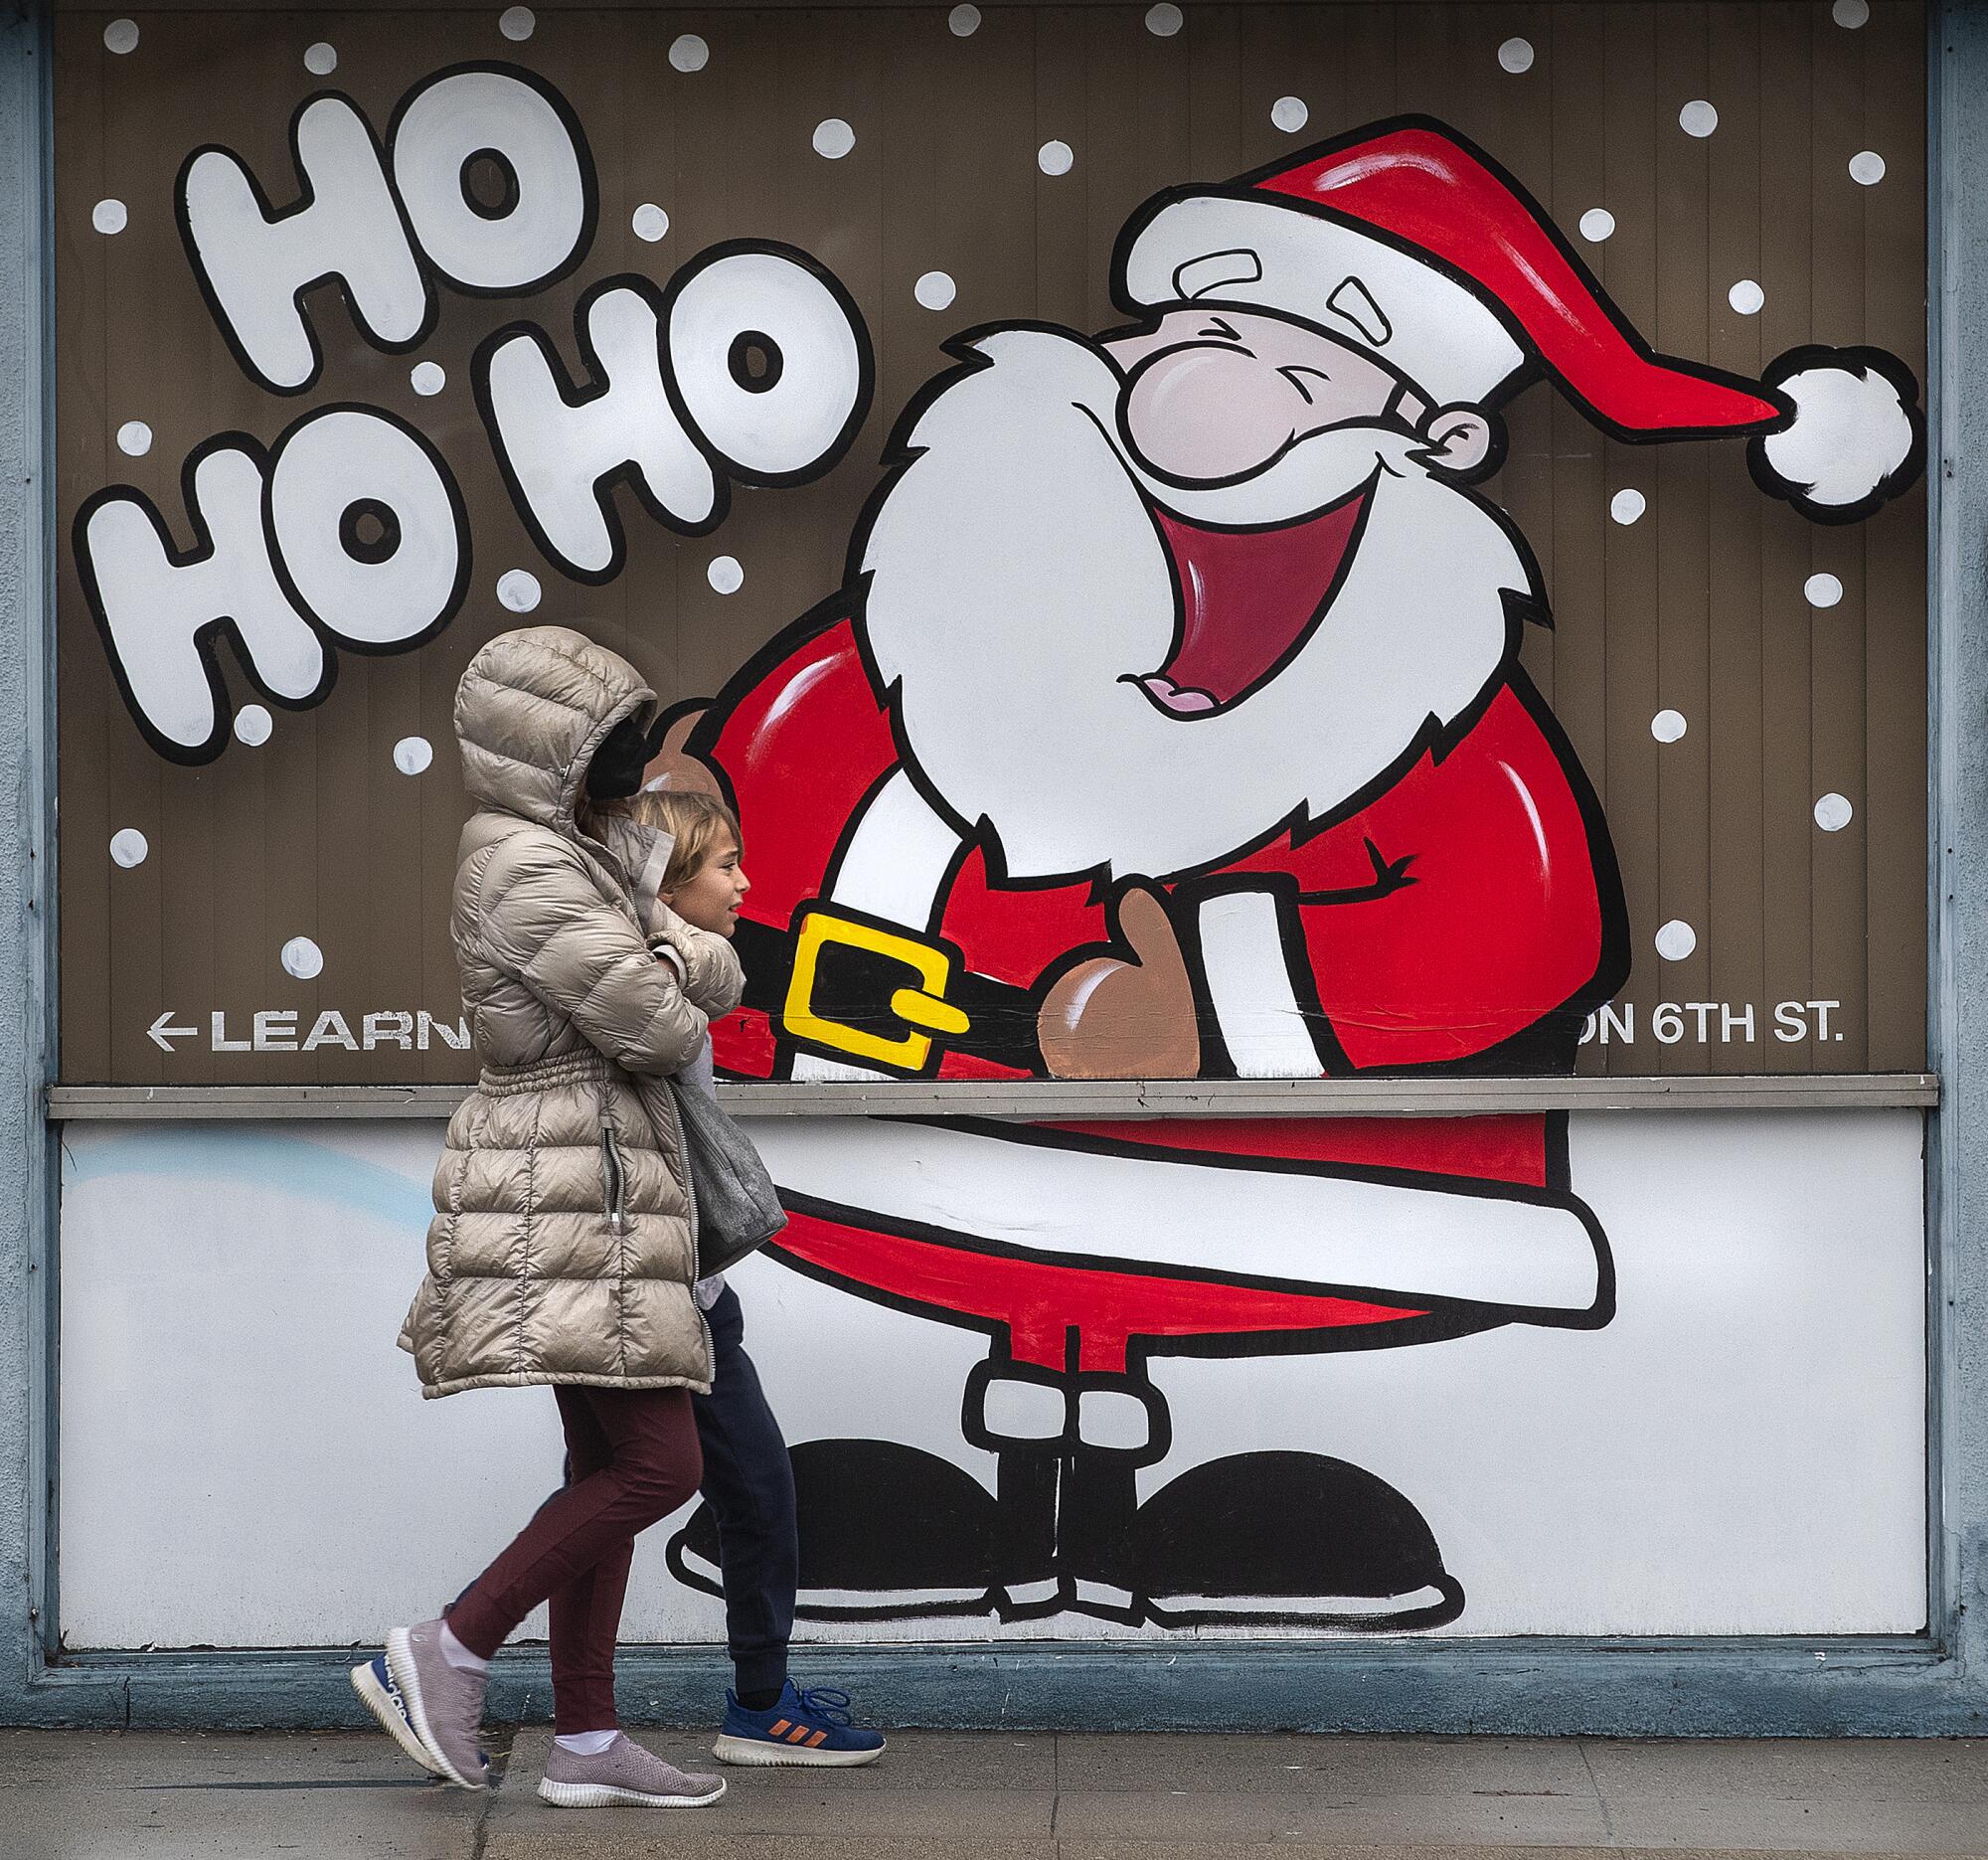 Pedestrians walk past a storefront with a cartoon of Santa Claus and the words "Ho ho ho"